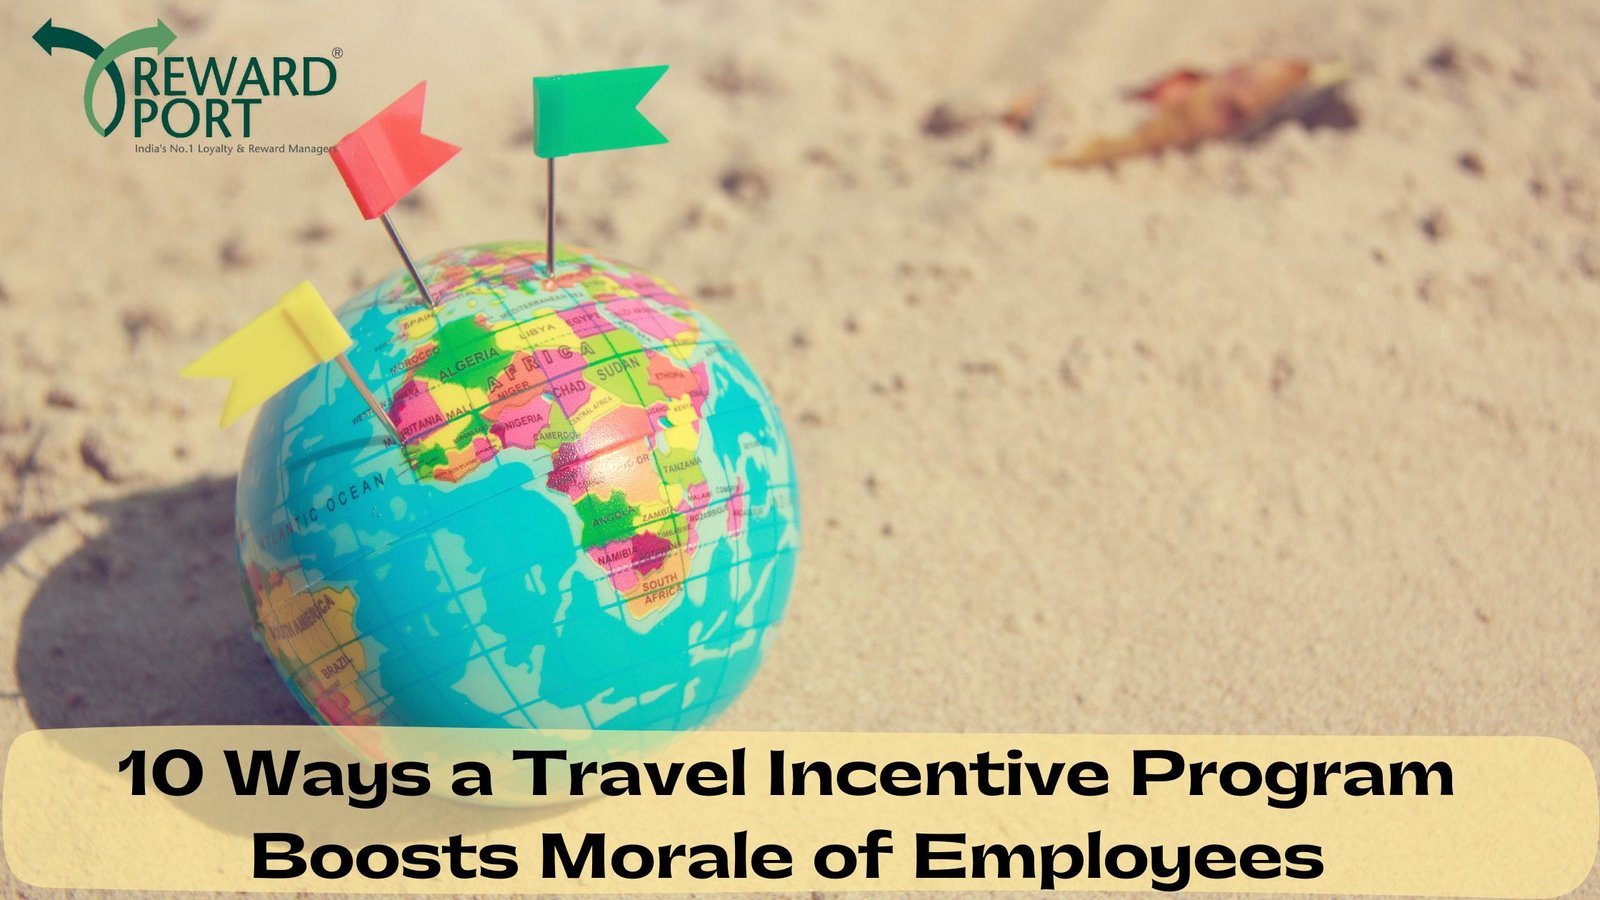 10 ways a travel incentive program boosts morale of employees